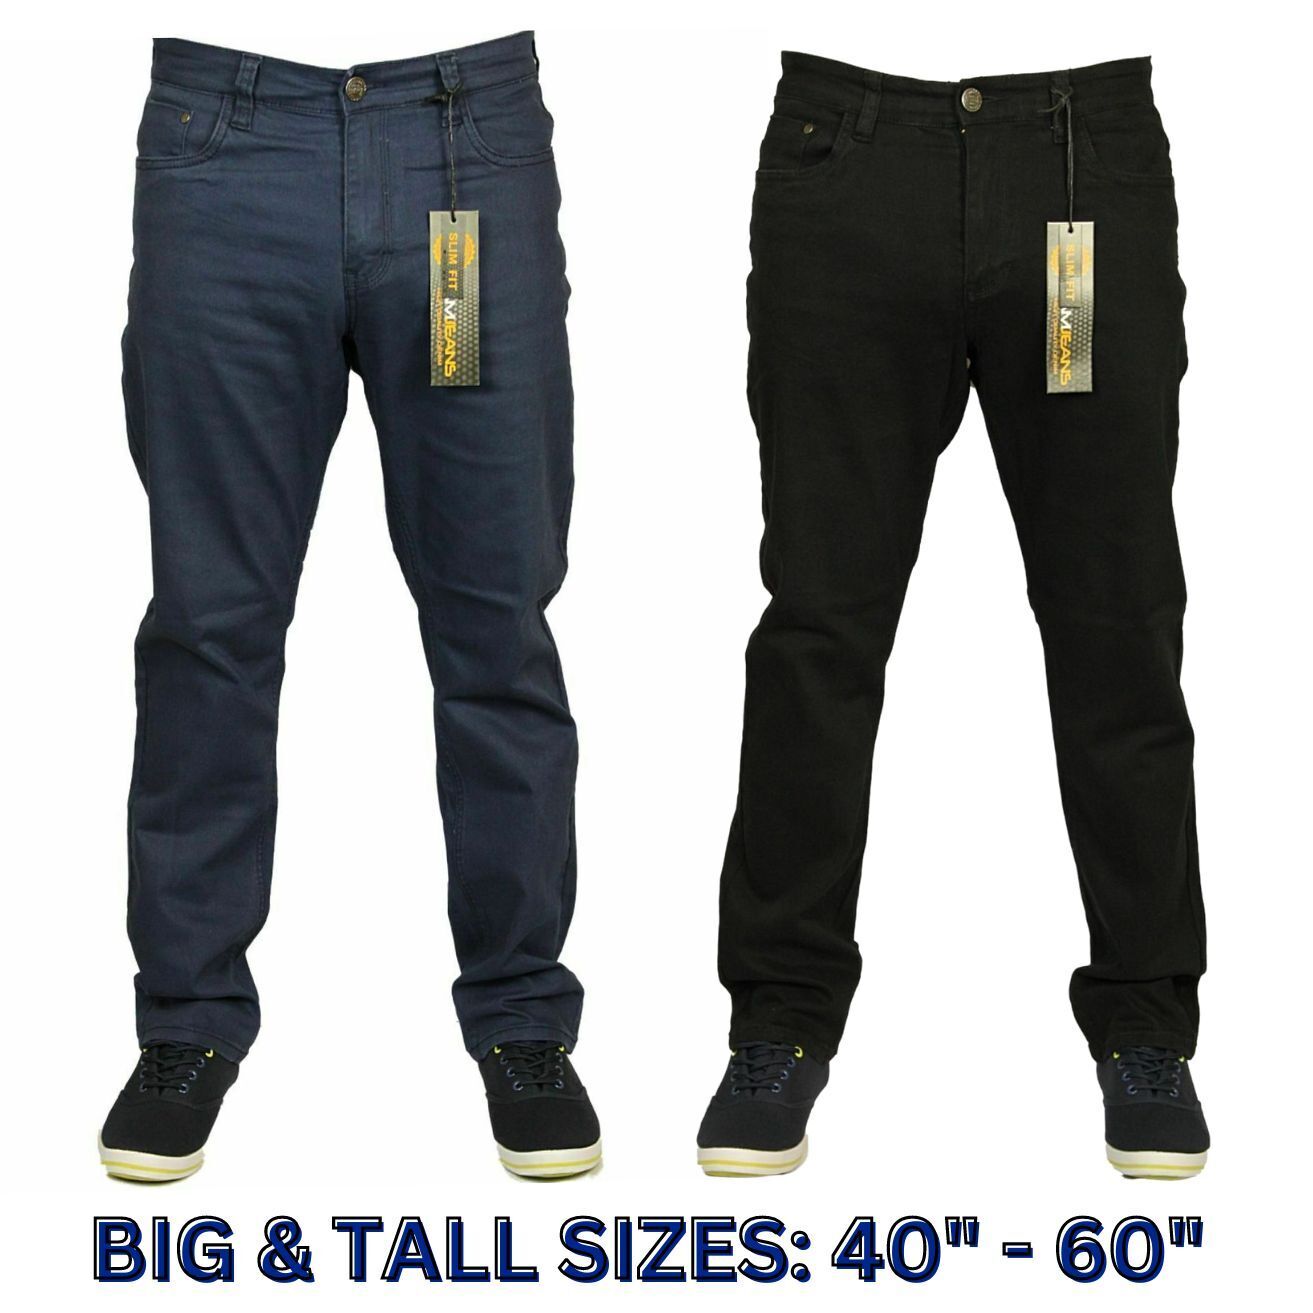 Mens Big King Size Stretch Chinos Straight Leg Jeans Pants Sizes 28-60